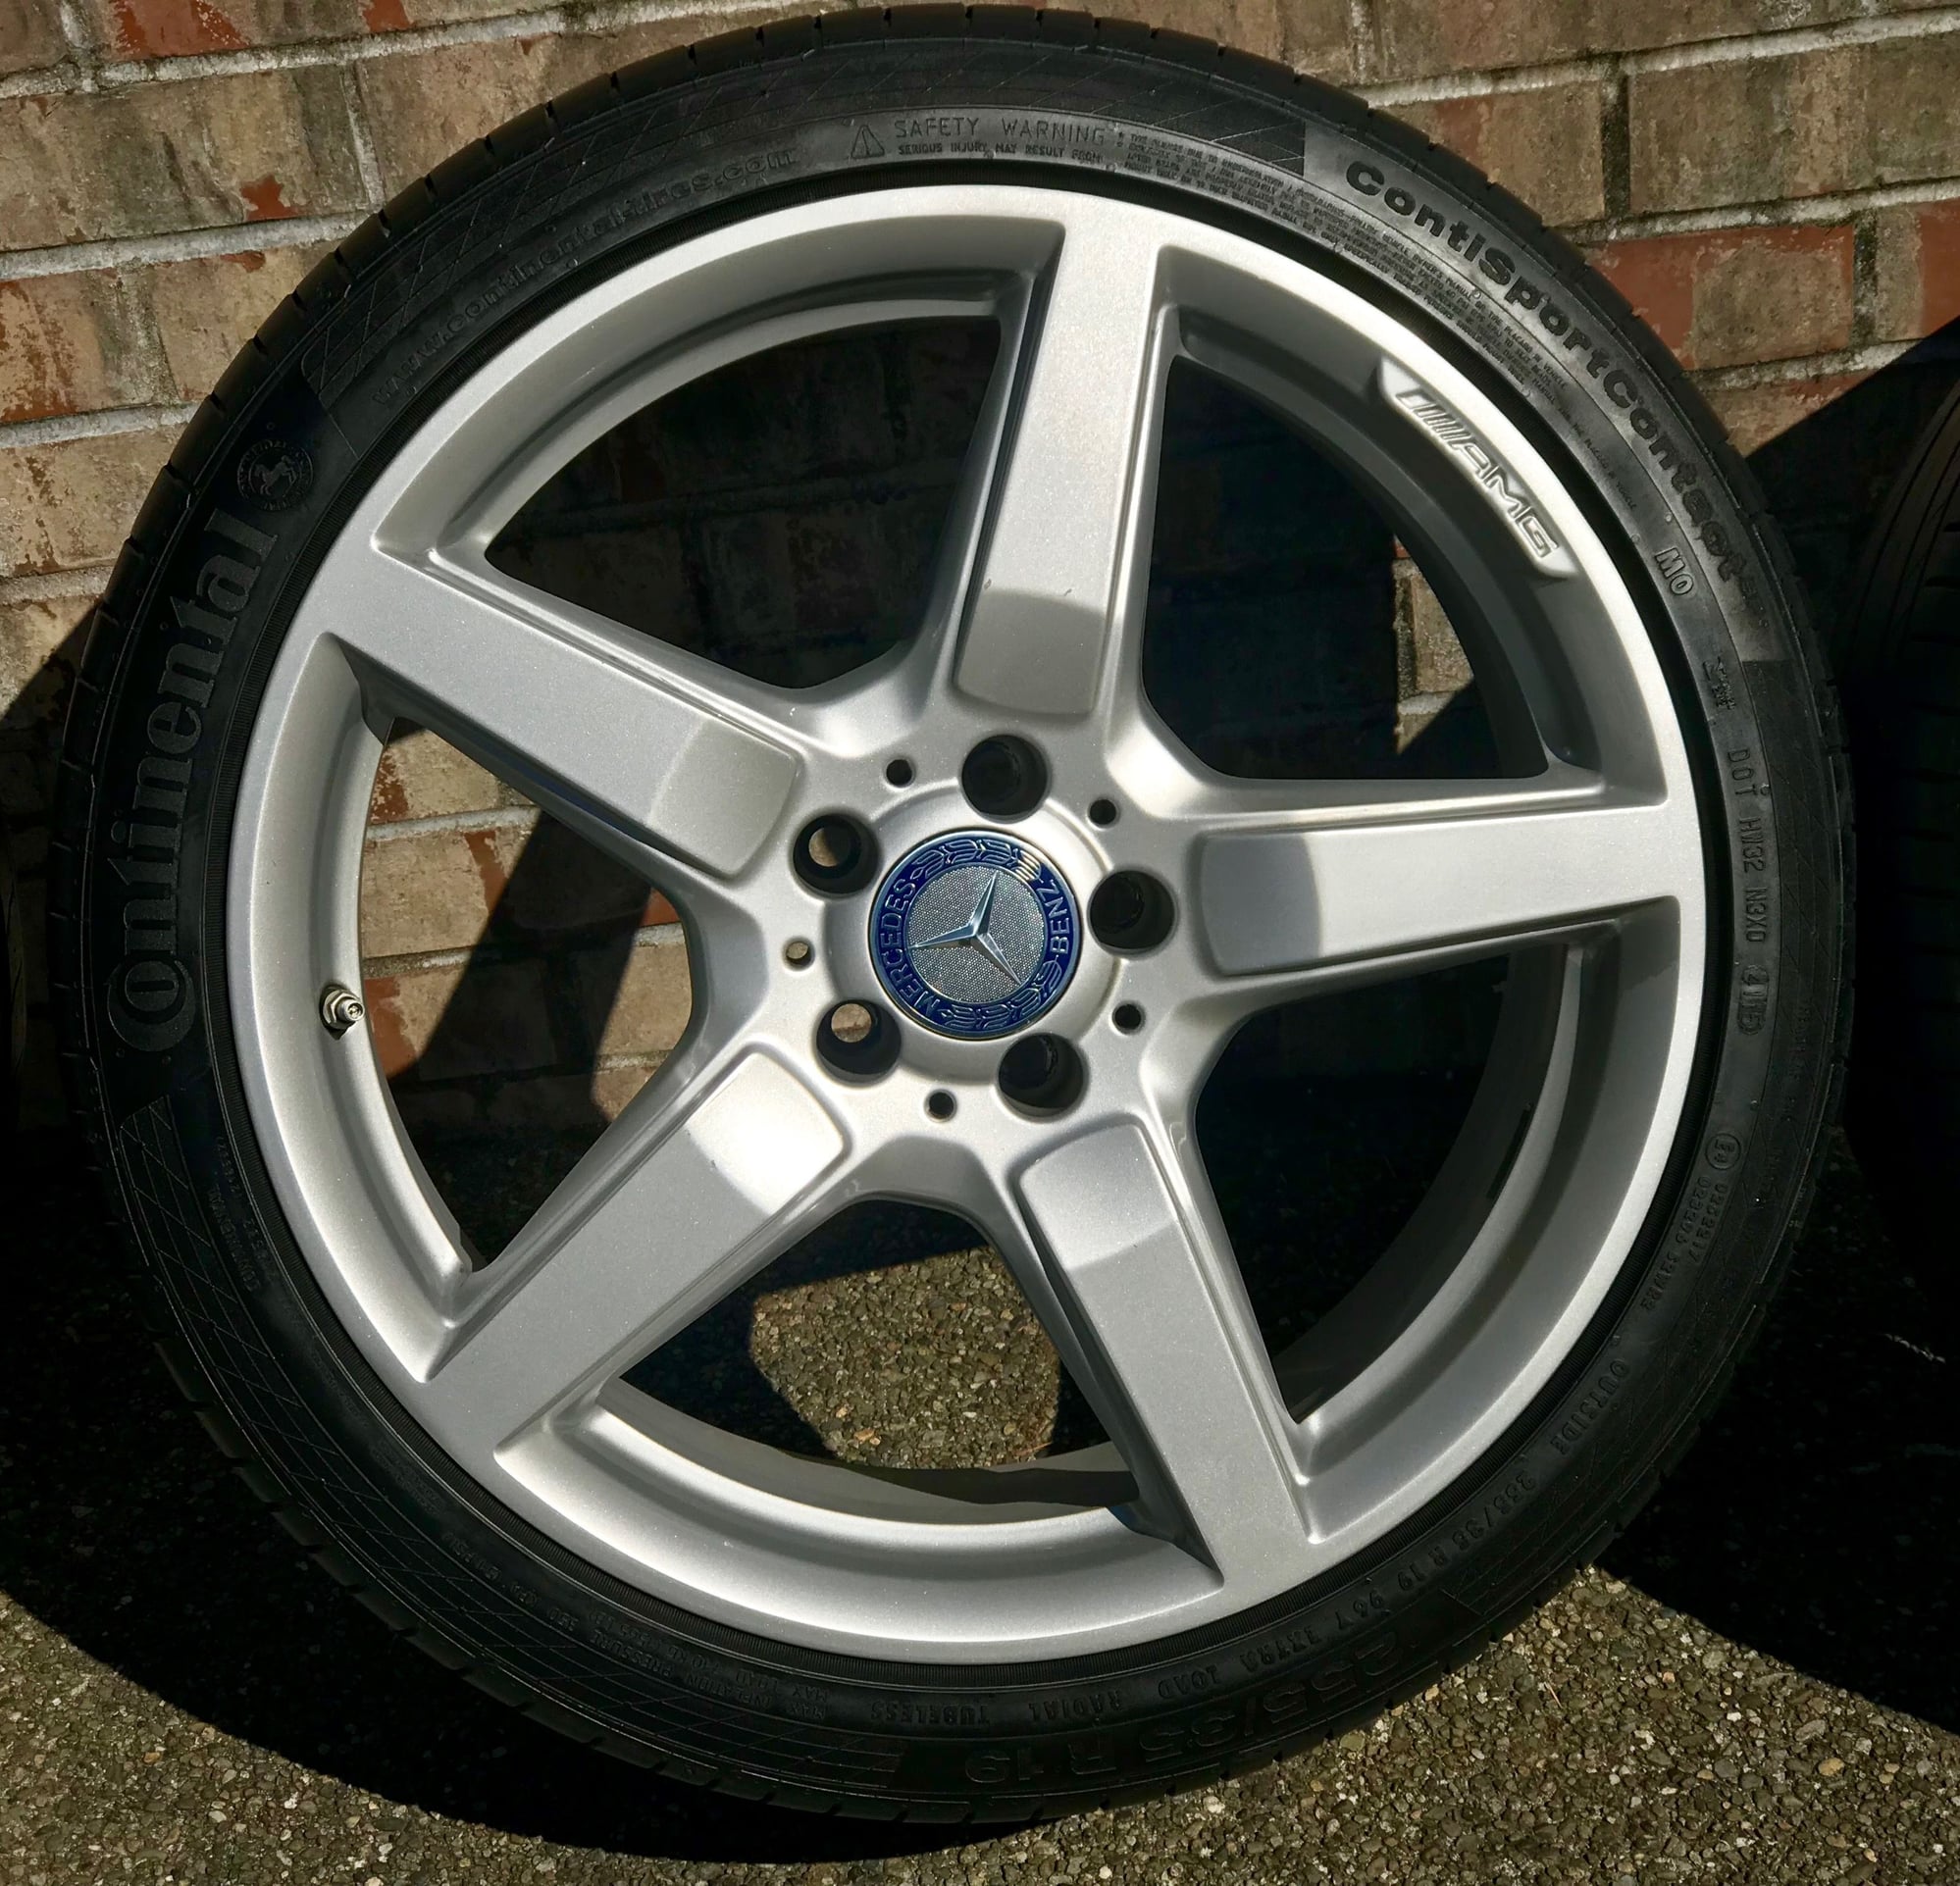 Wheels and Tires/Axles - 19" AMG STAGGERED WHEELS - Used - 2012 to 2018 Mercedes-Benz CLS550 - Gig Harbor, WA 98335, United States